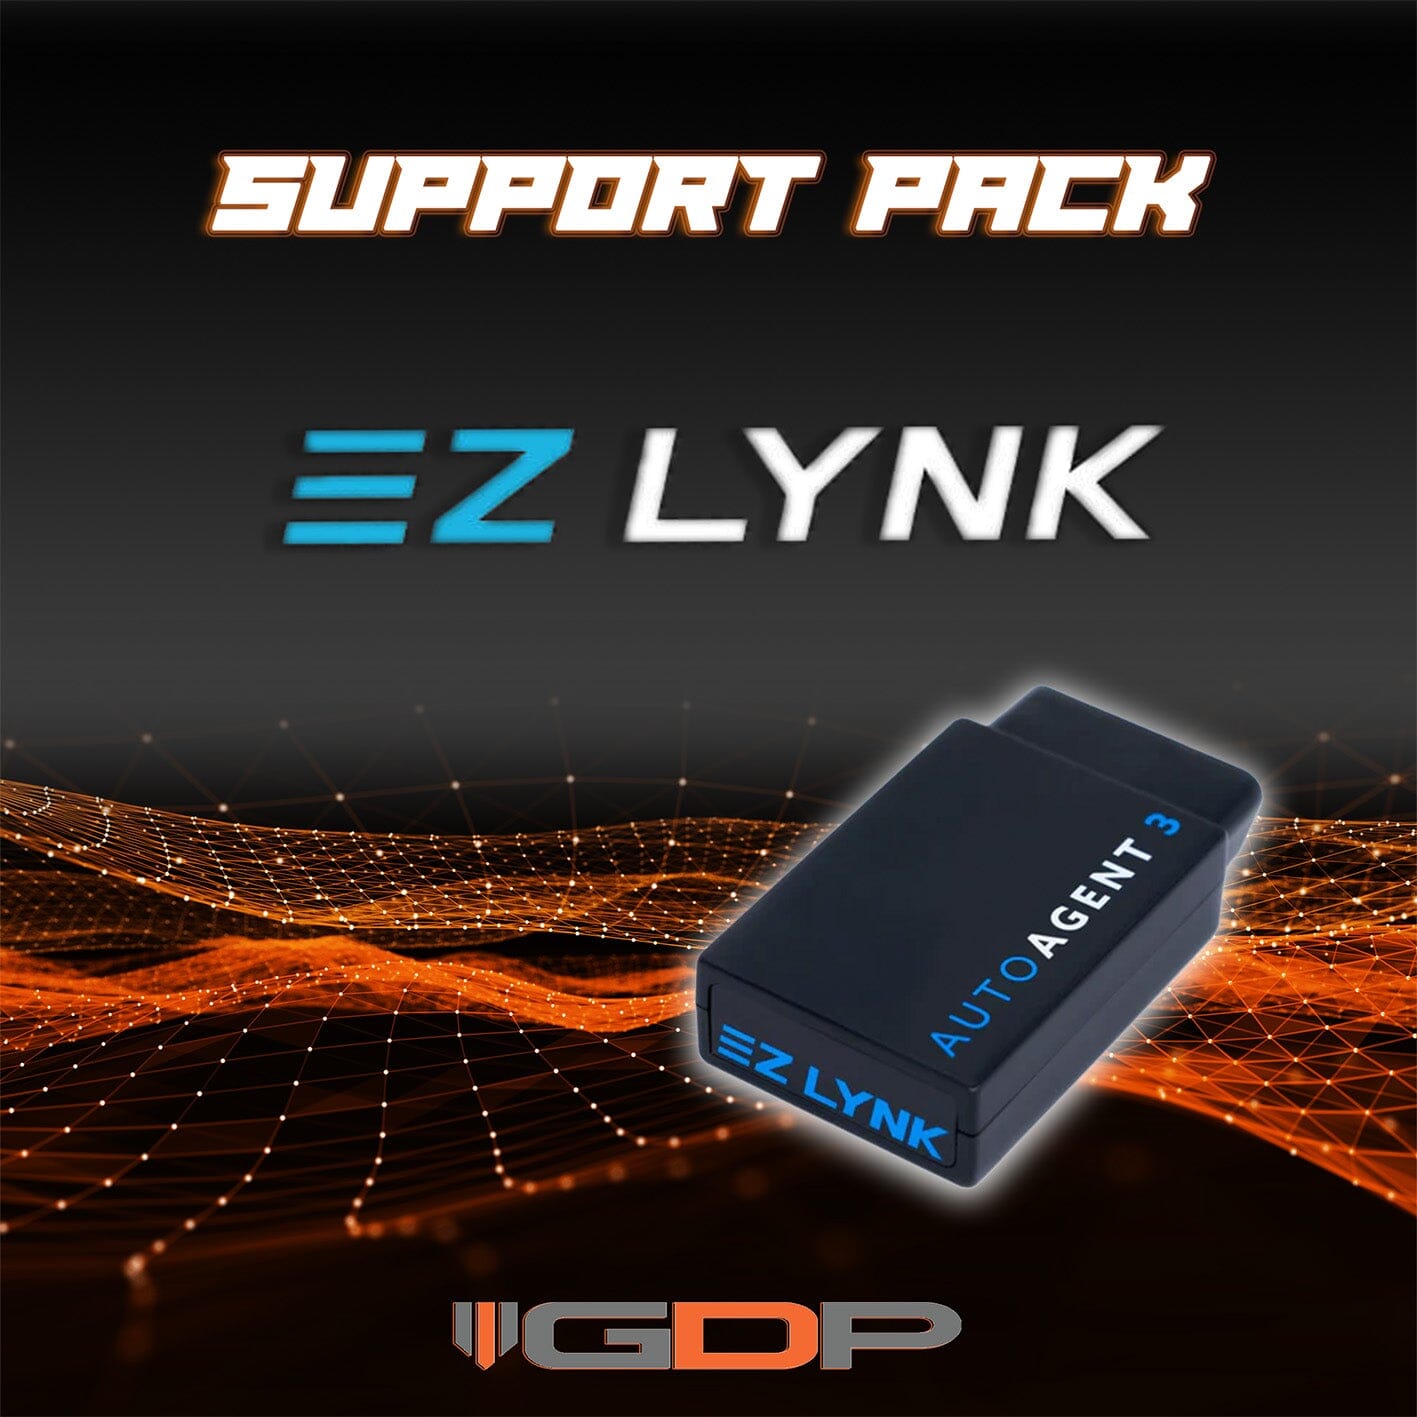 EZ Lynk Auto Agent 3 w/ GDP 4-Week Support Pack (Ford/GM/Ram/Nissan) Tune Package GDP 